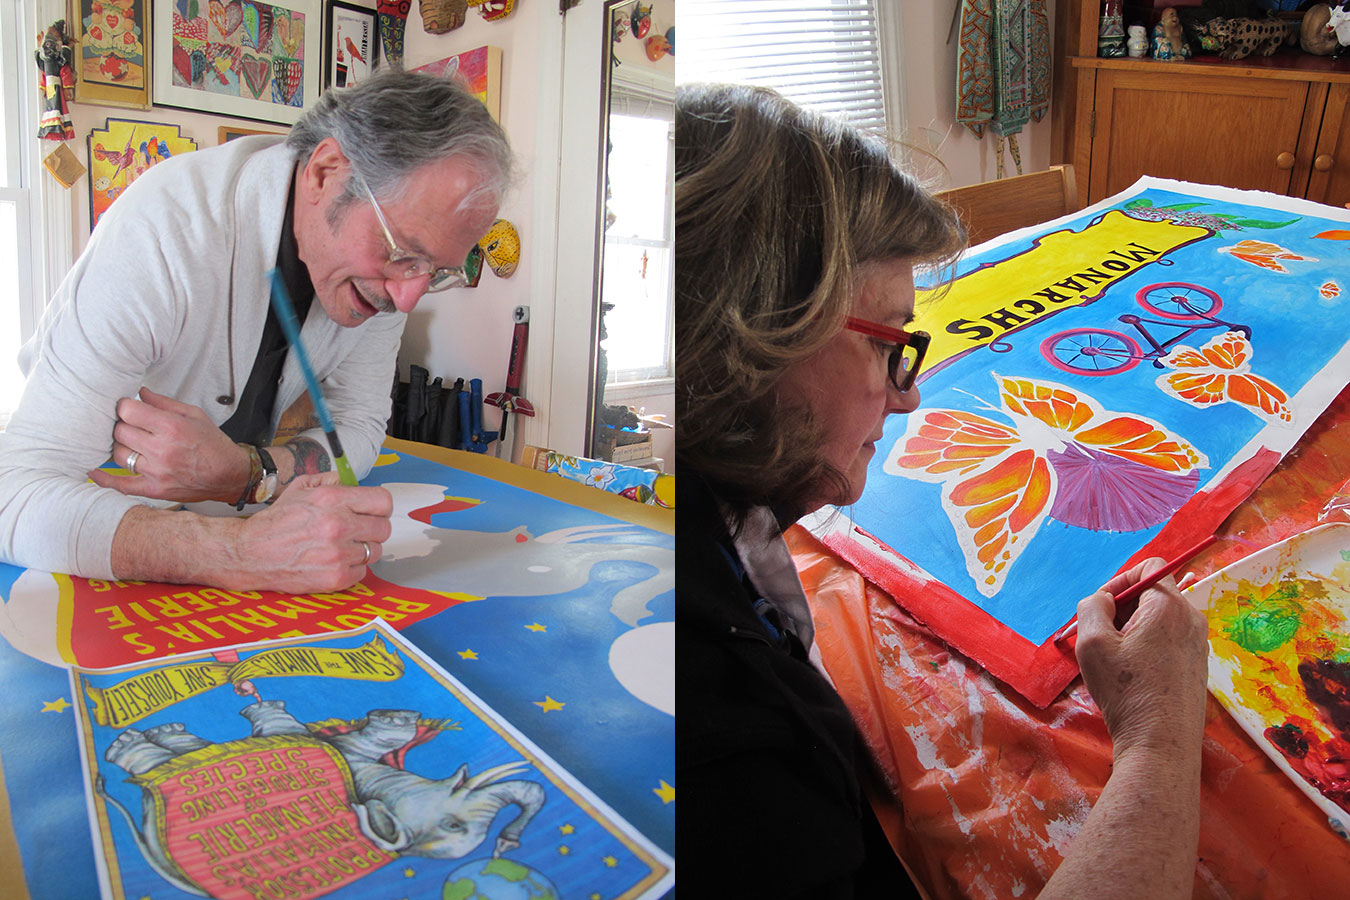 Joe, left, and Bess paint some of the posters for their Animalia exhibition in their dining room studio. Their house, filled with paintings, folk art, masks, and customized furniture, is on the cusp of Bryan Park. | Photo by Claude Cookman